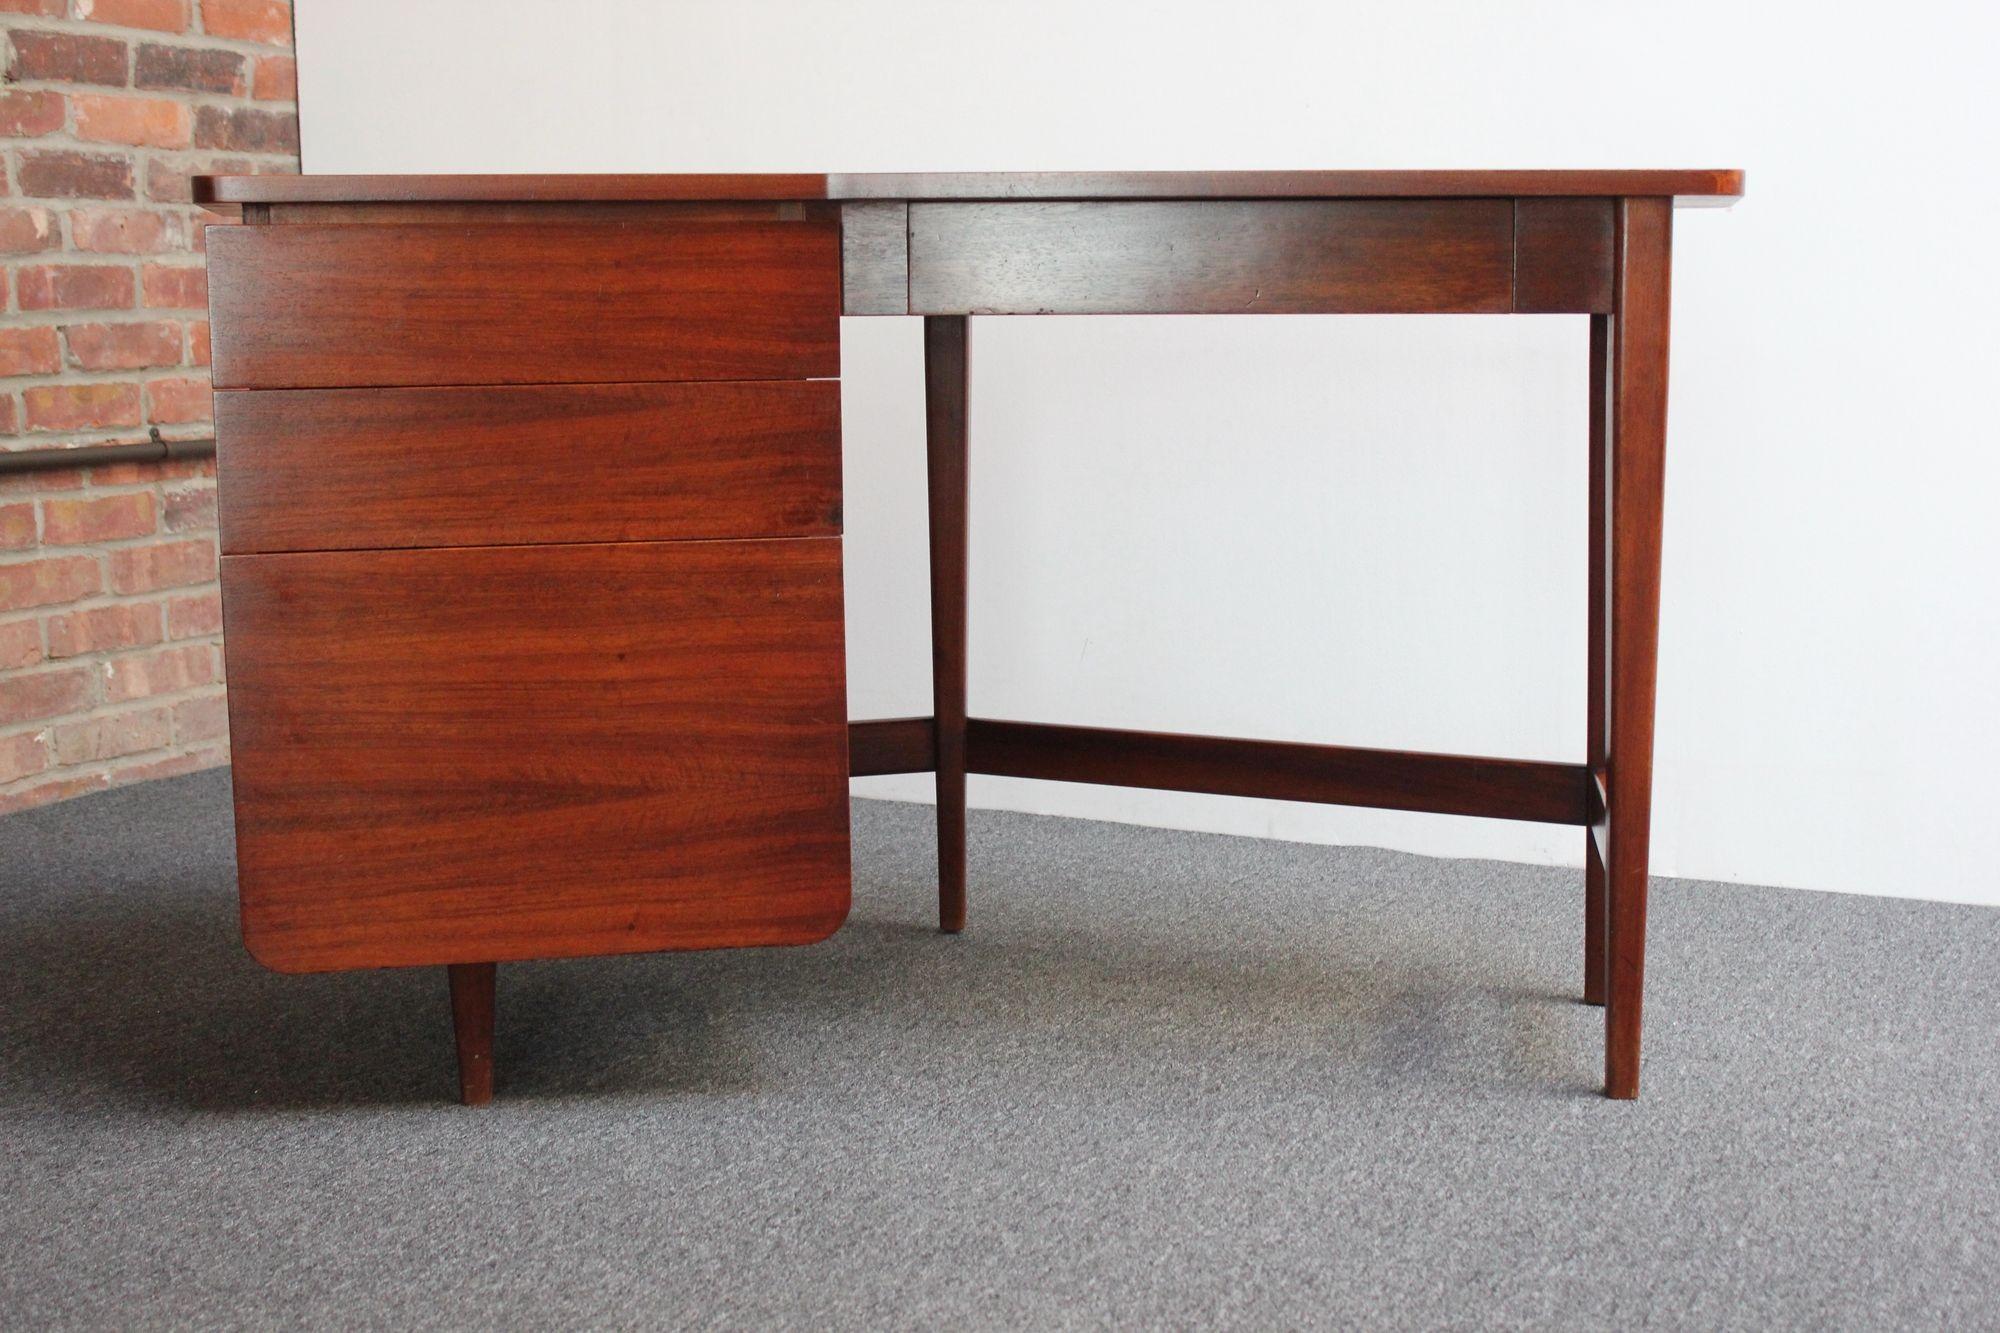 Diminutive midcentury angled student desk in Italian walnut designed by Bertha Schaefer for M. Singer & Sons (Model 2162 - USA, ca. 1955).
Often co-attributed to Gio Ponti, who also designed for Singer & Sons, but no such claim has been confirmed.